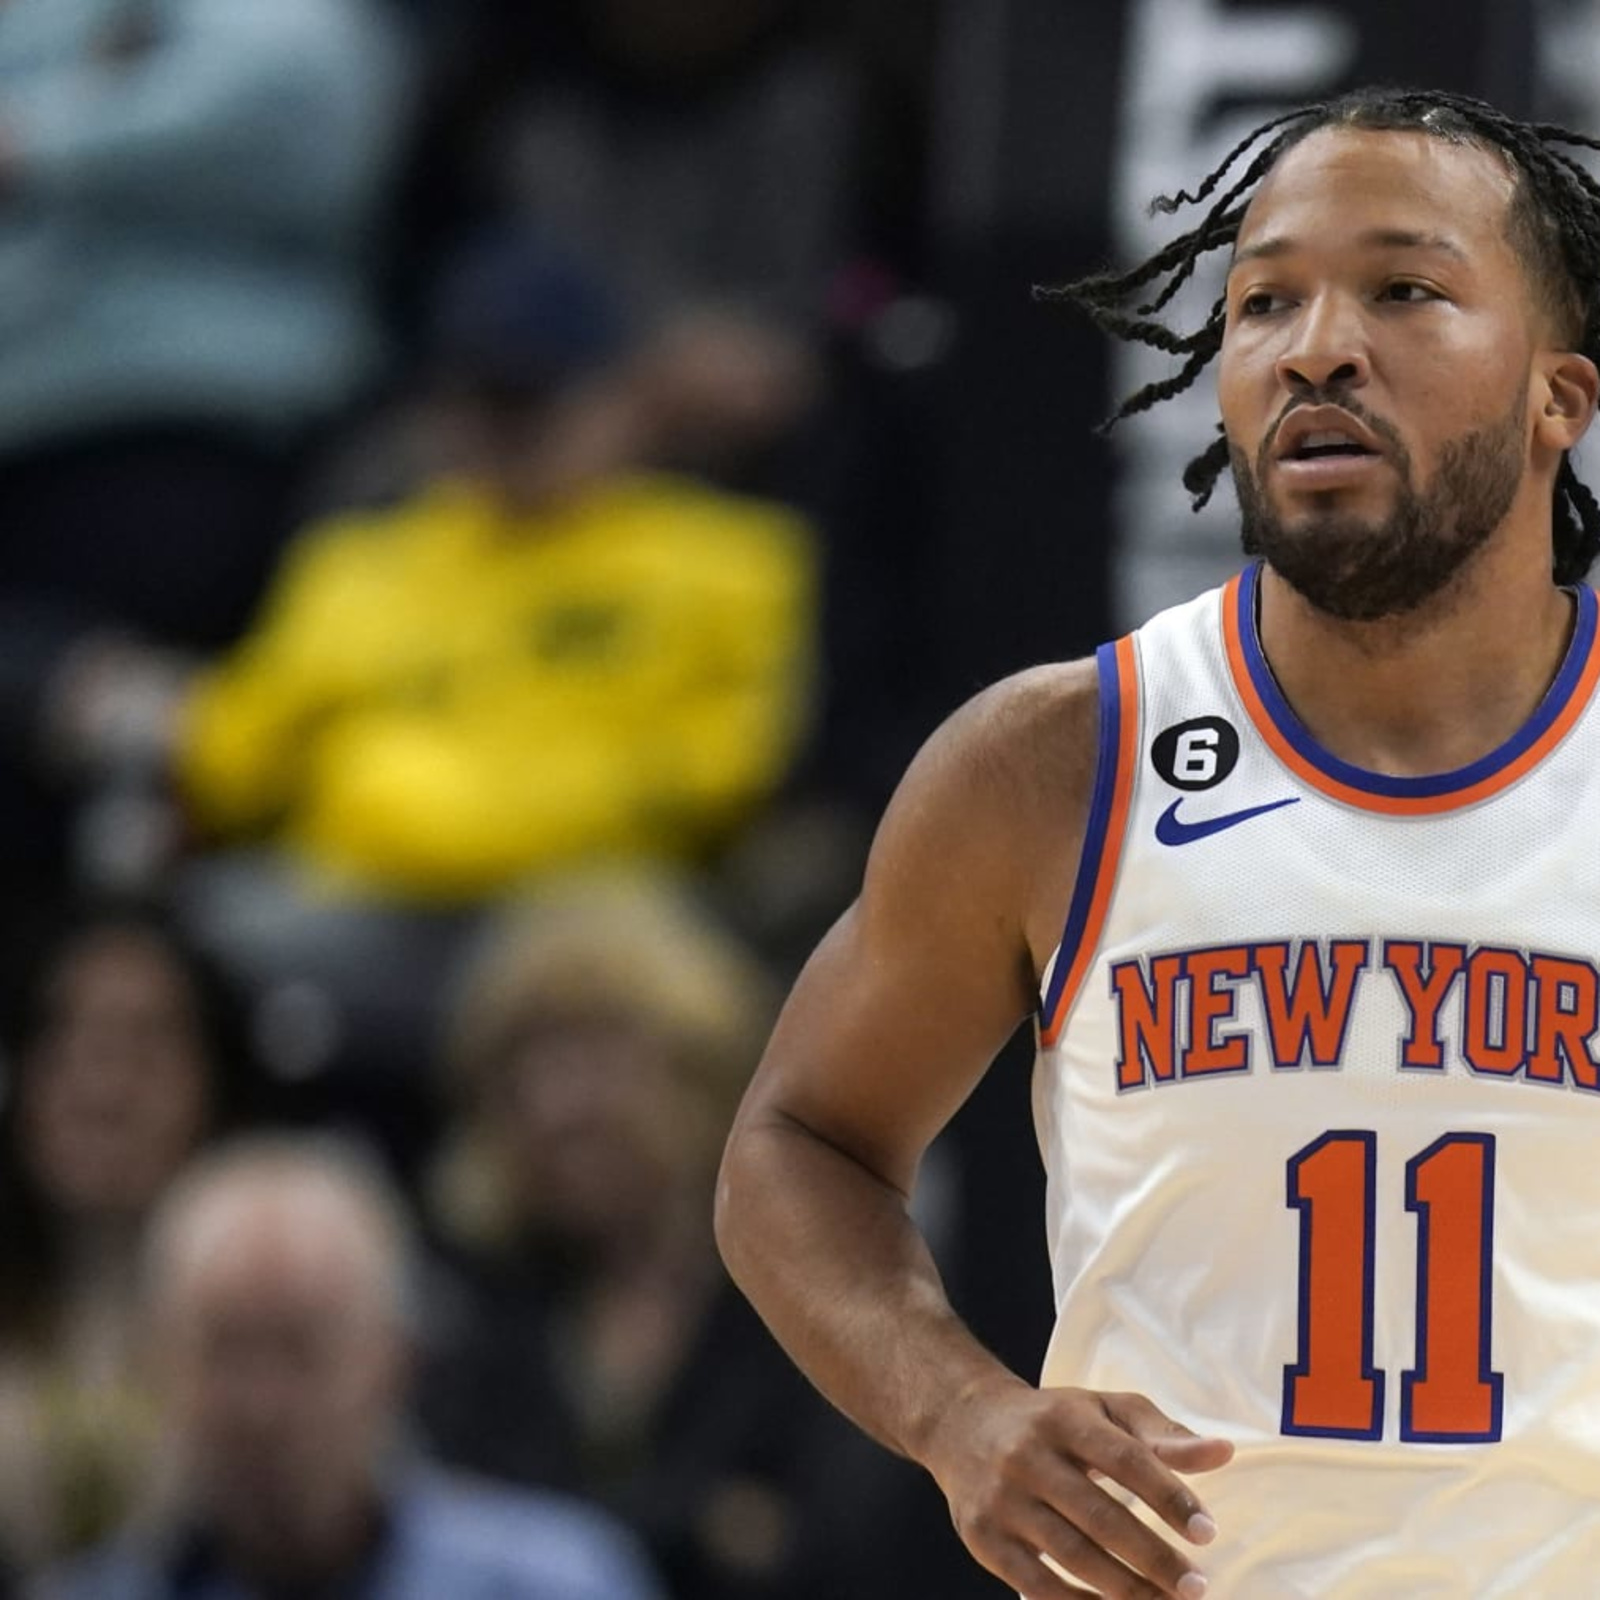 Knicks Star Jalen Brunson Has One Thing on His Mind: 'Win' (Exclusive)